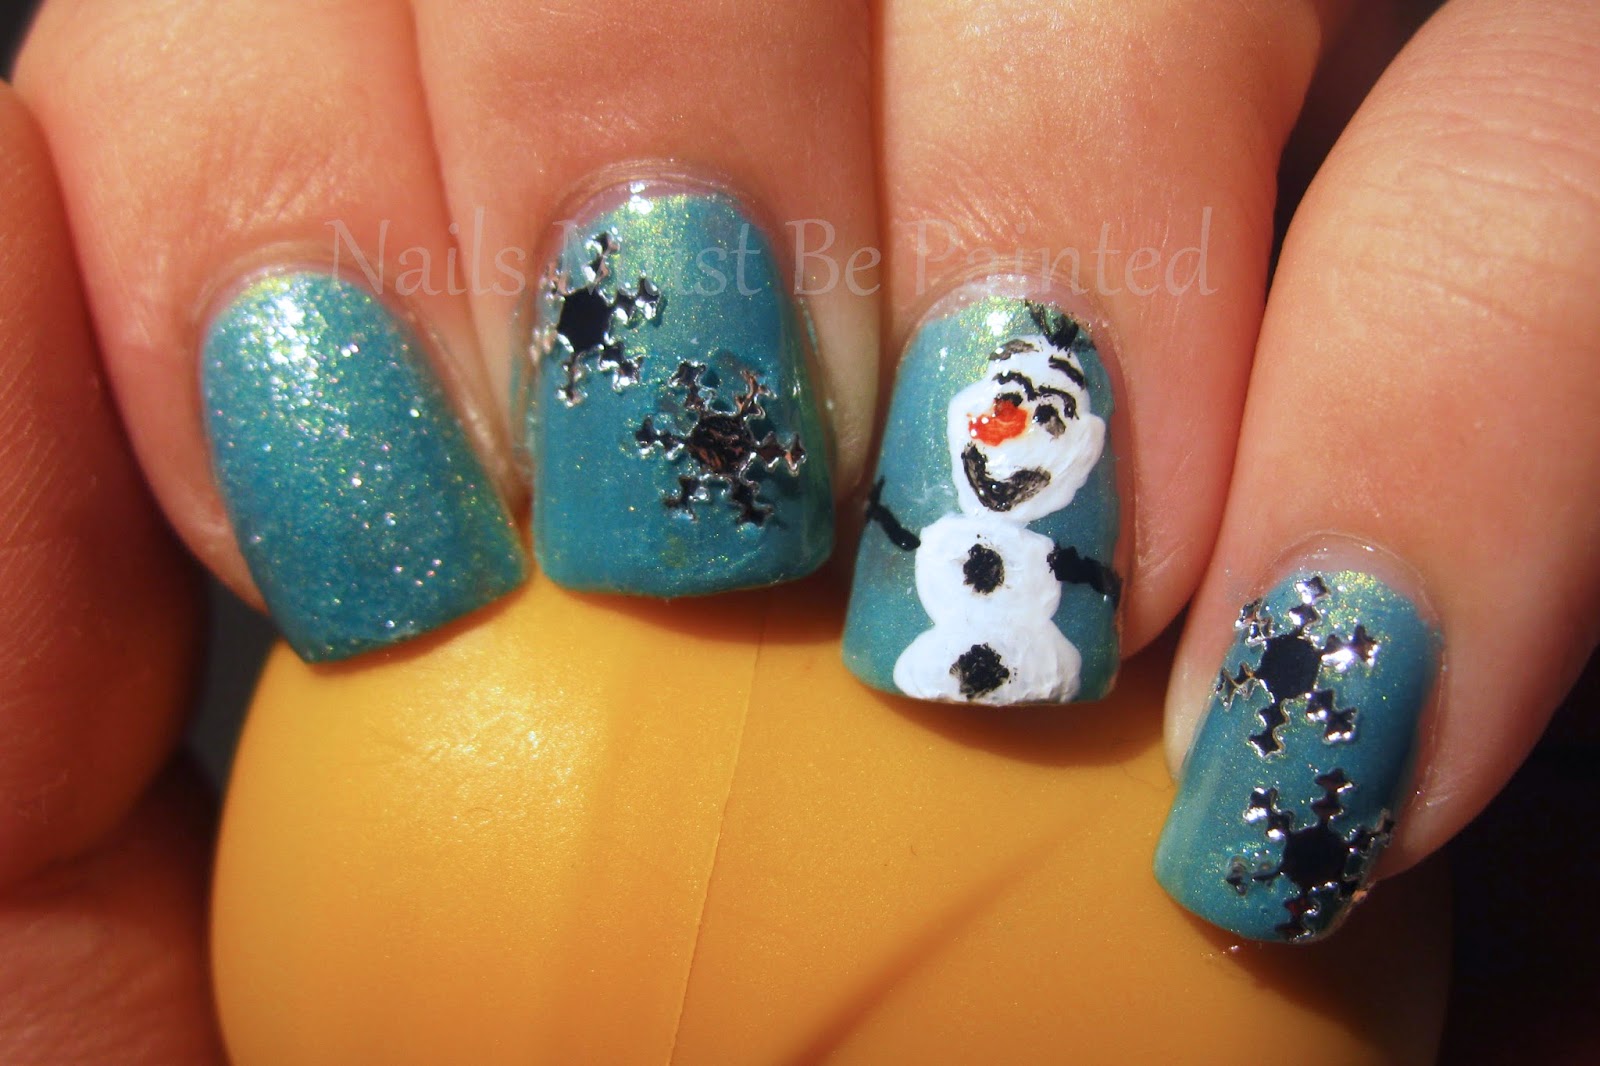 Nails Must Be Painted: 12 Days of Christmas: Do You Wanna Build A Snowman?